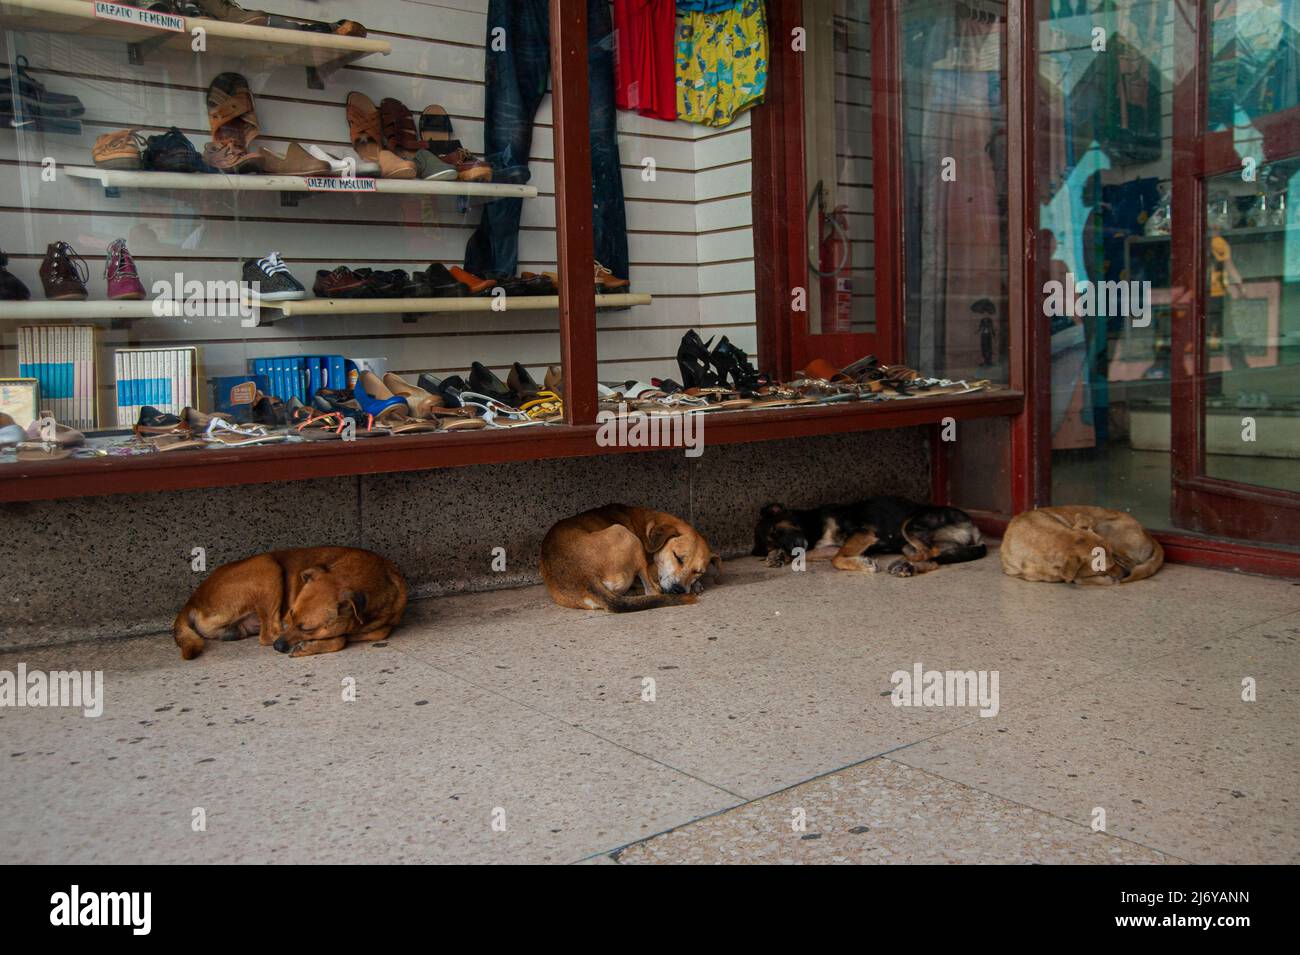 Sleeping dogs lying down on the sidewalk in front of a shop in Matanzas, Cuba. Stock Photo